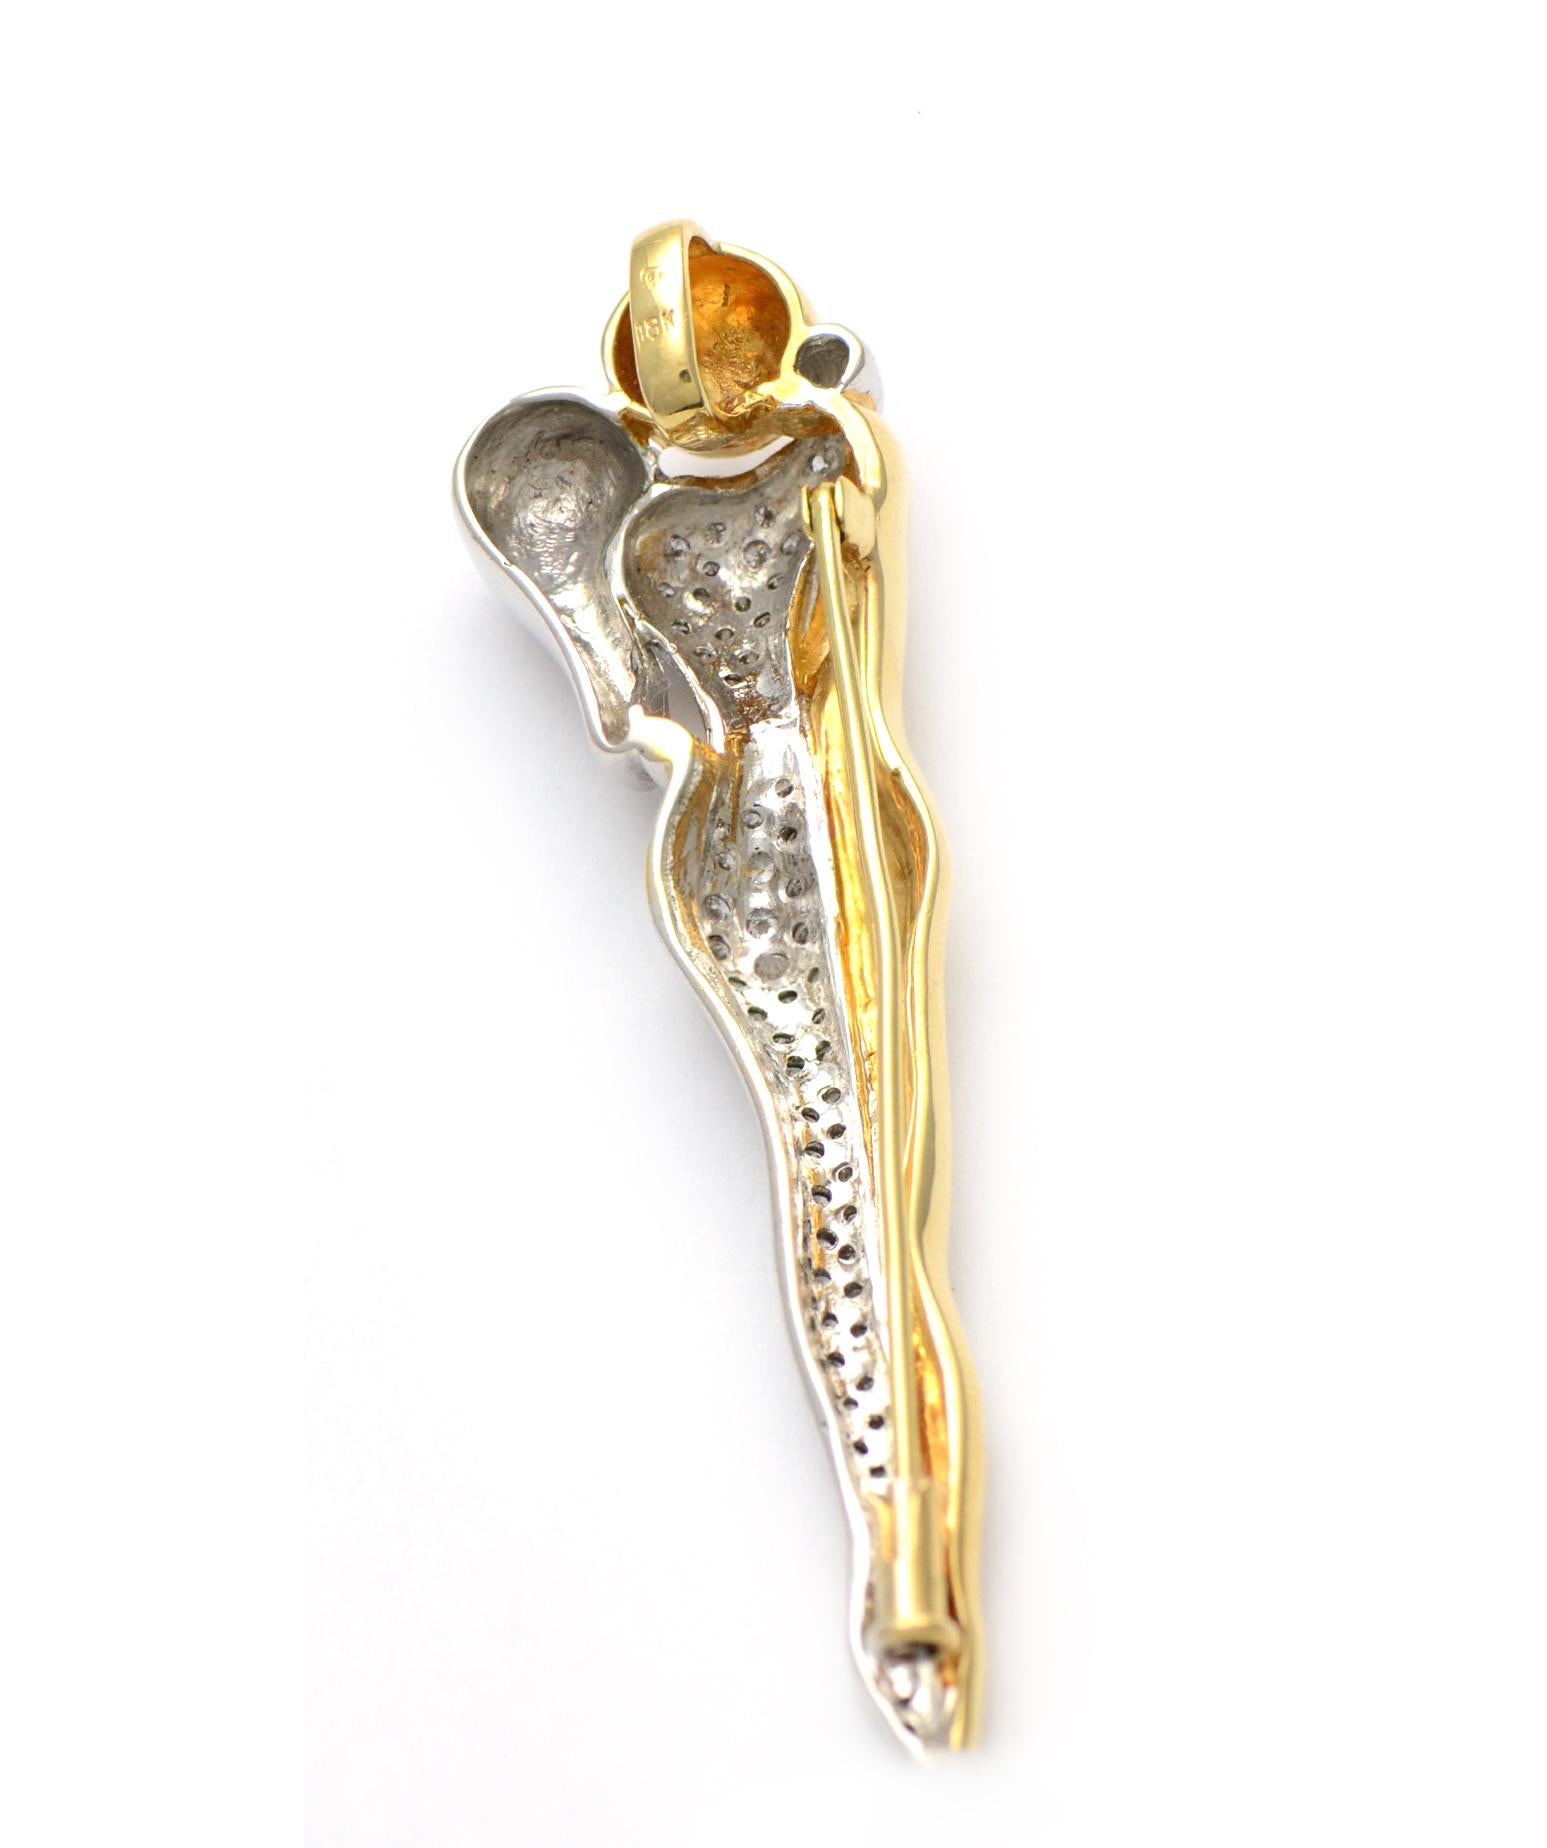 100% Authentic Erte Solid 18K Two-Tone Gold Man & Woman Diamond Pin/Pendant
This 100% Authentic Erte Solid 18K Two-Tone Gold Man & Woman Diamond Pendant/Brooch is in excellent condition! It is a truly beautiful piece measuring approximately 2.5